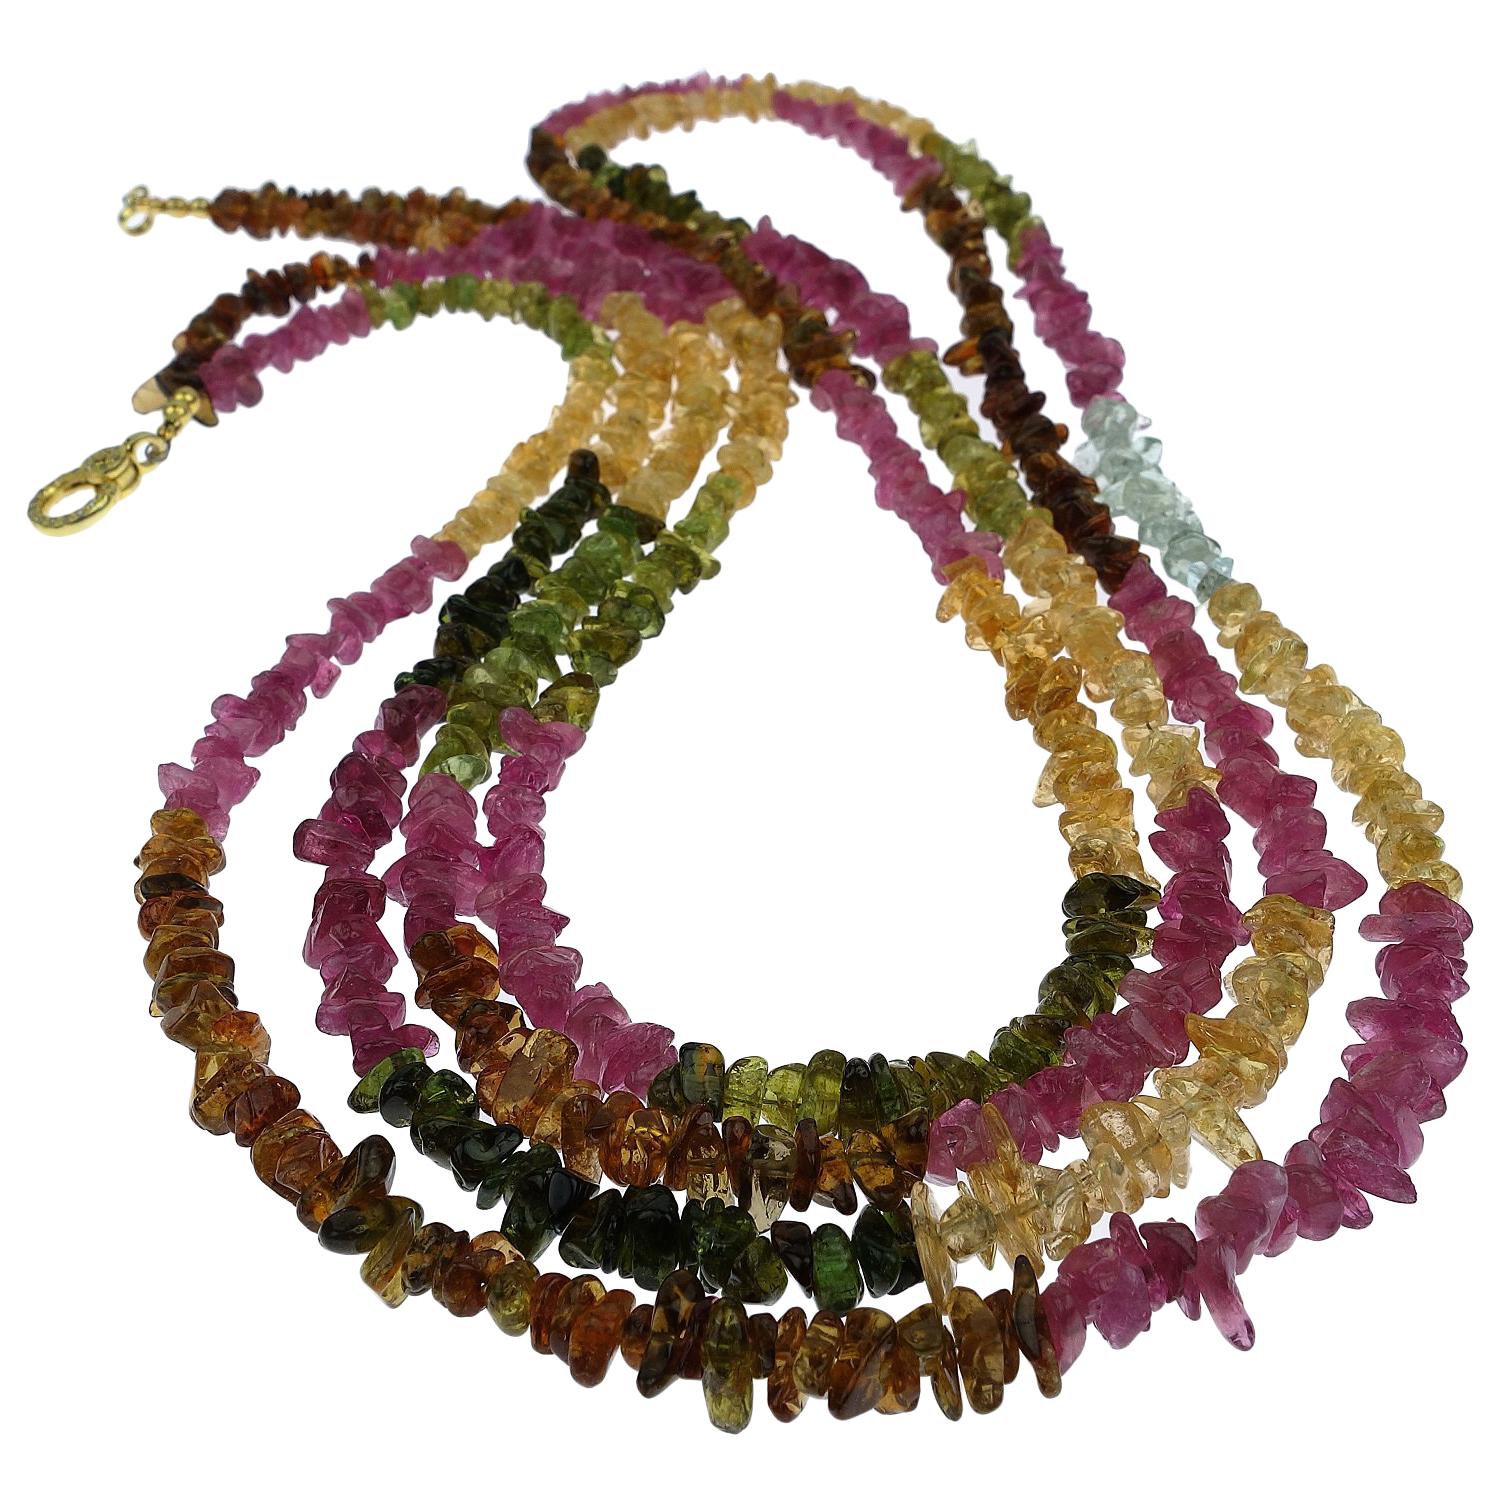 Custom made, long, 39 inch, double Strand necklace of highly polished translucent Multi Color Tourmaline chips secured with a diamond studded vermeil clasp.  This extraordinary necklace is so versatile, it can be worn as one long loop or doubled. It